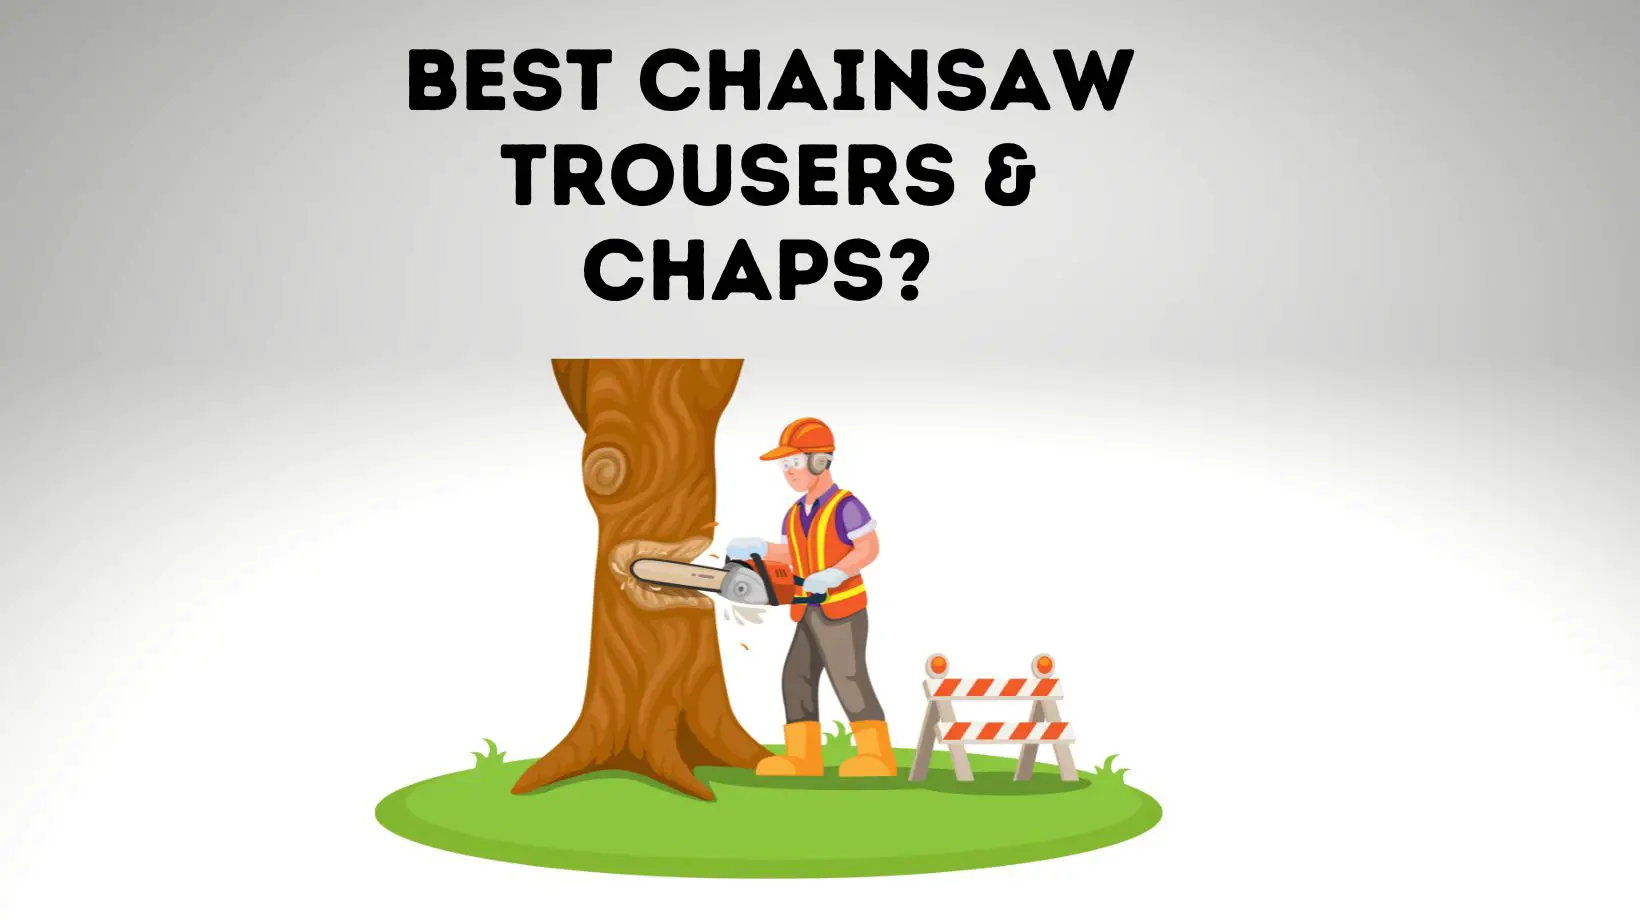 Best Chainsaw Trousers